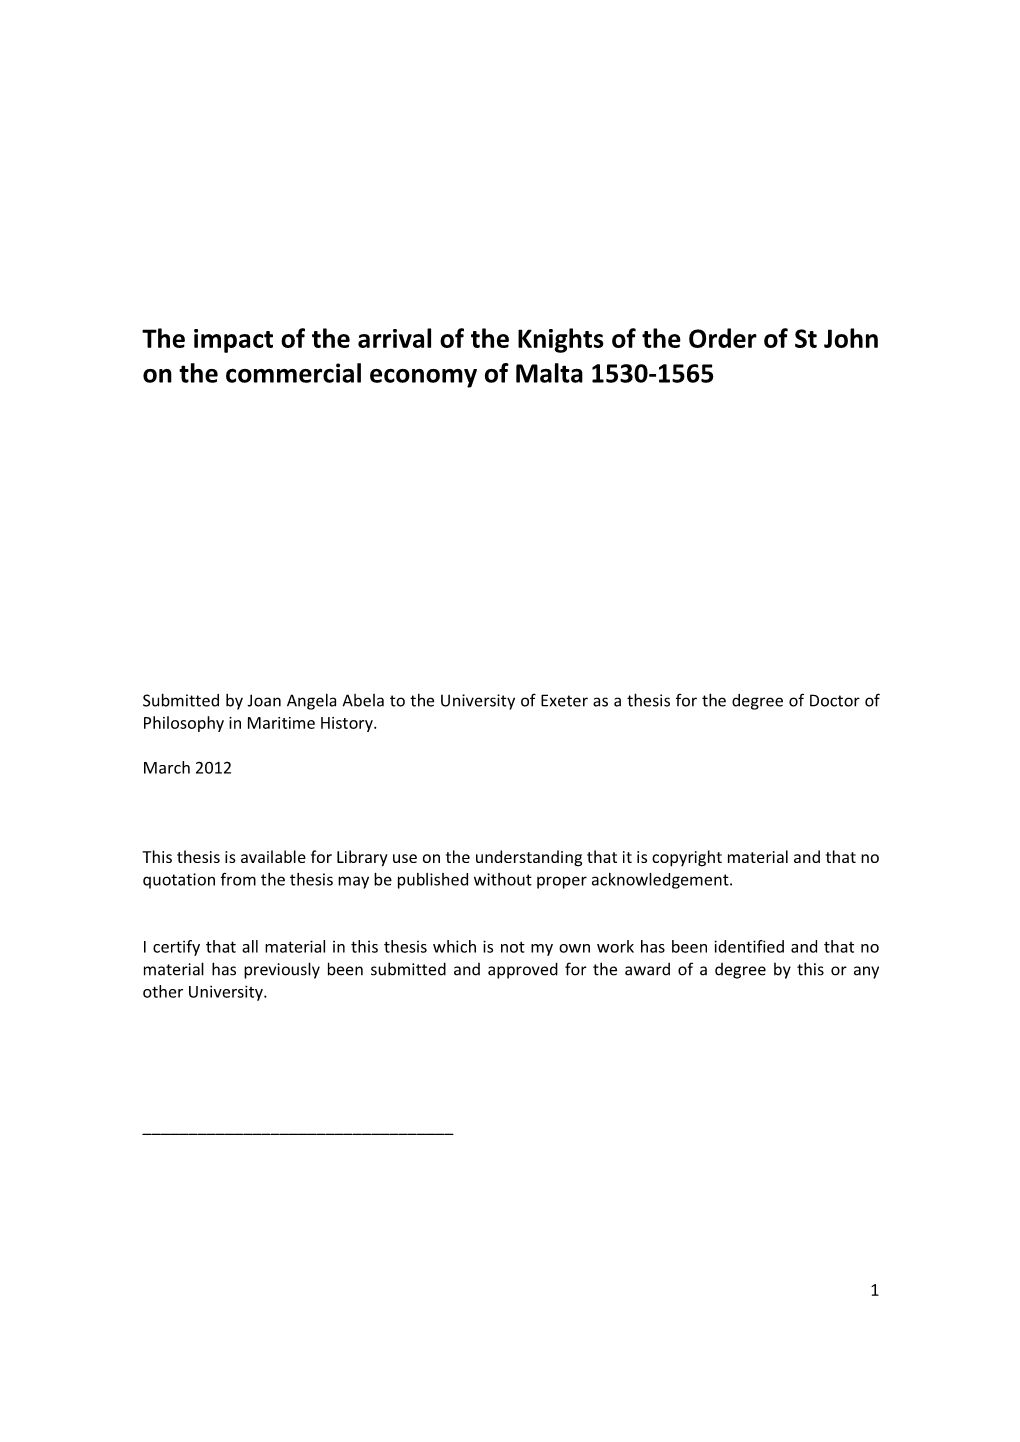 The Impact of the Arrival of the Knights of the Order of St John on the Commercial Economy of Malta 1530-1565